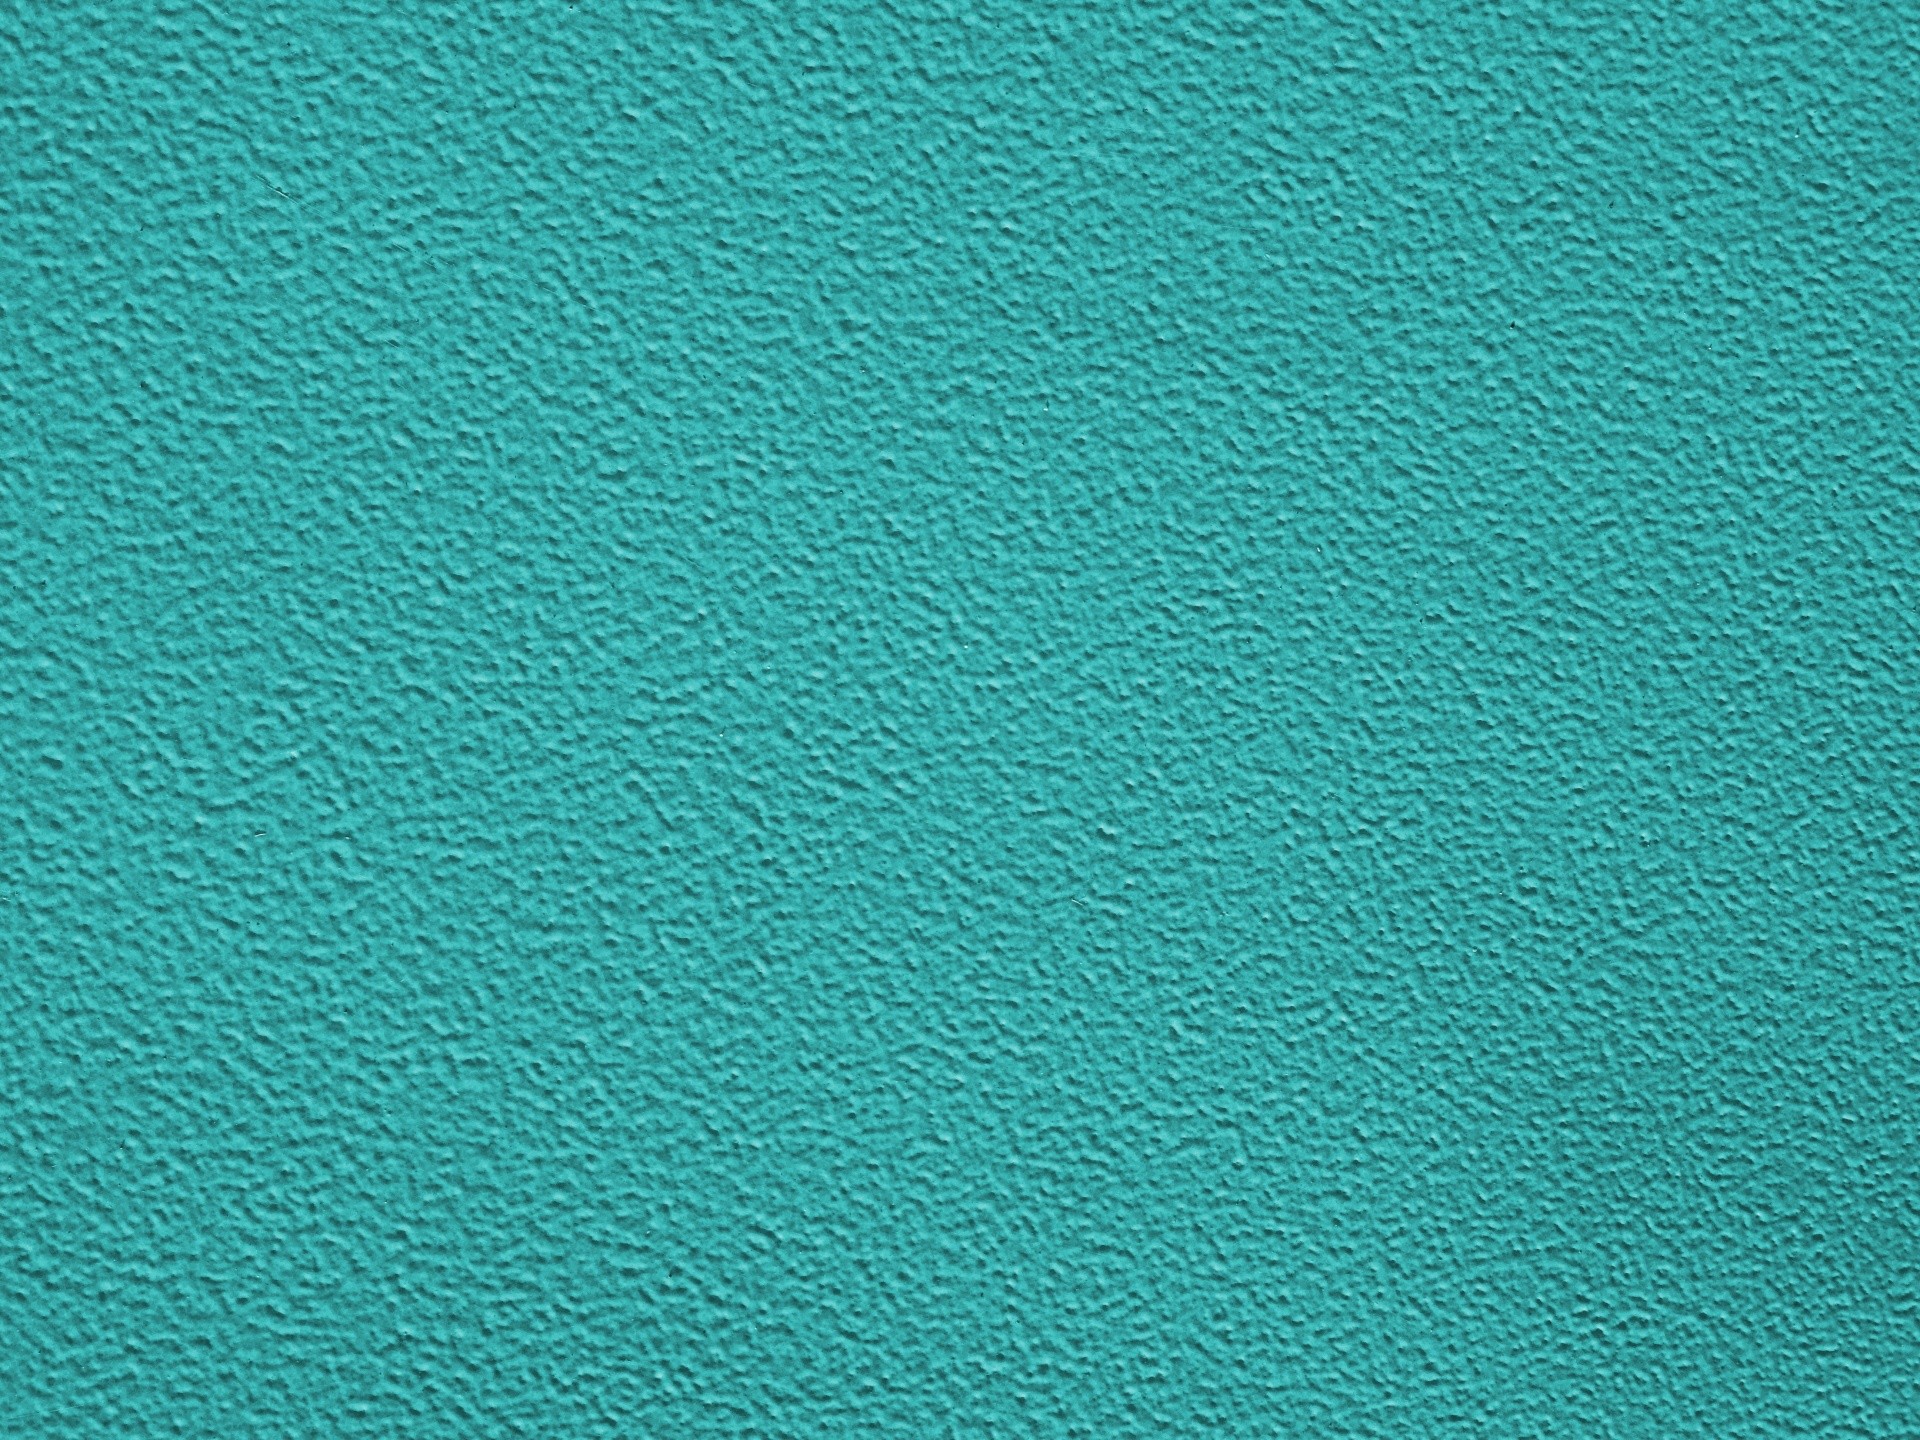 1920x1440 Turquoise Textured Background